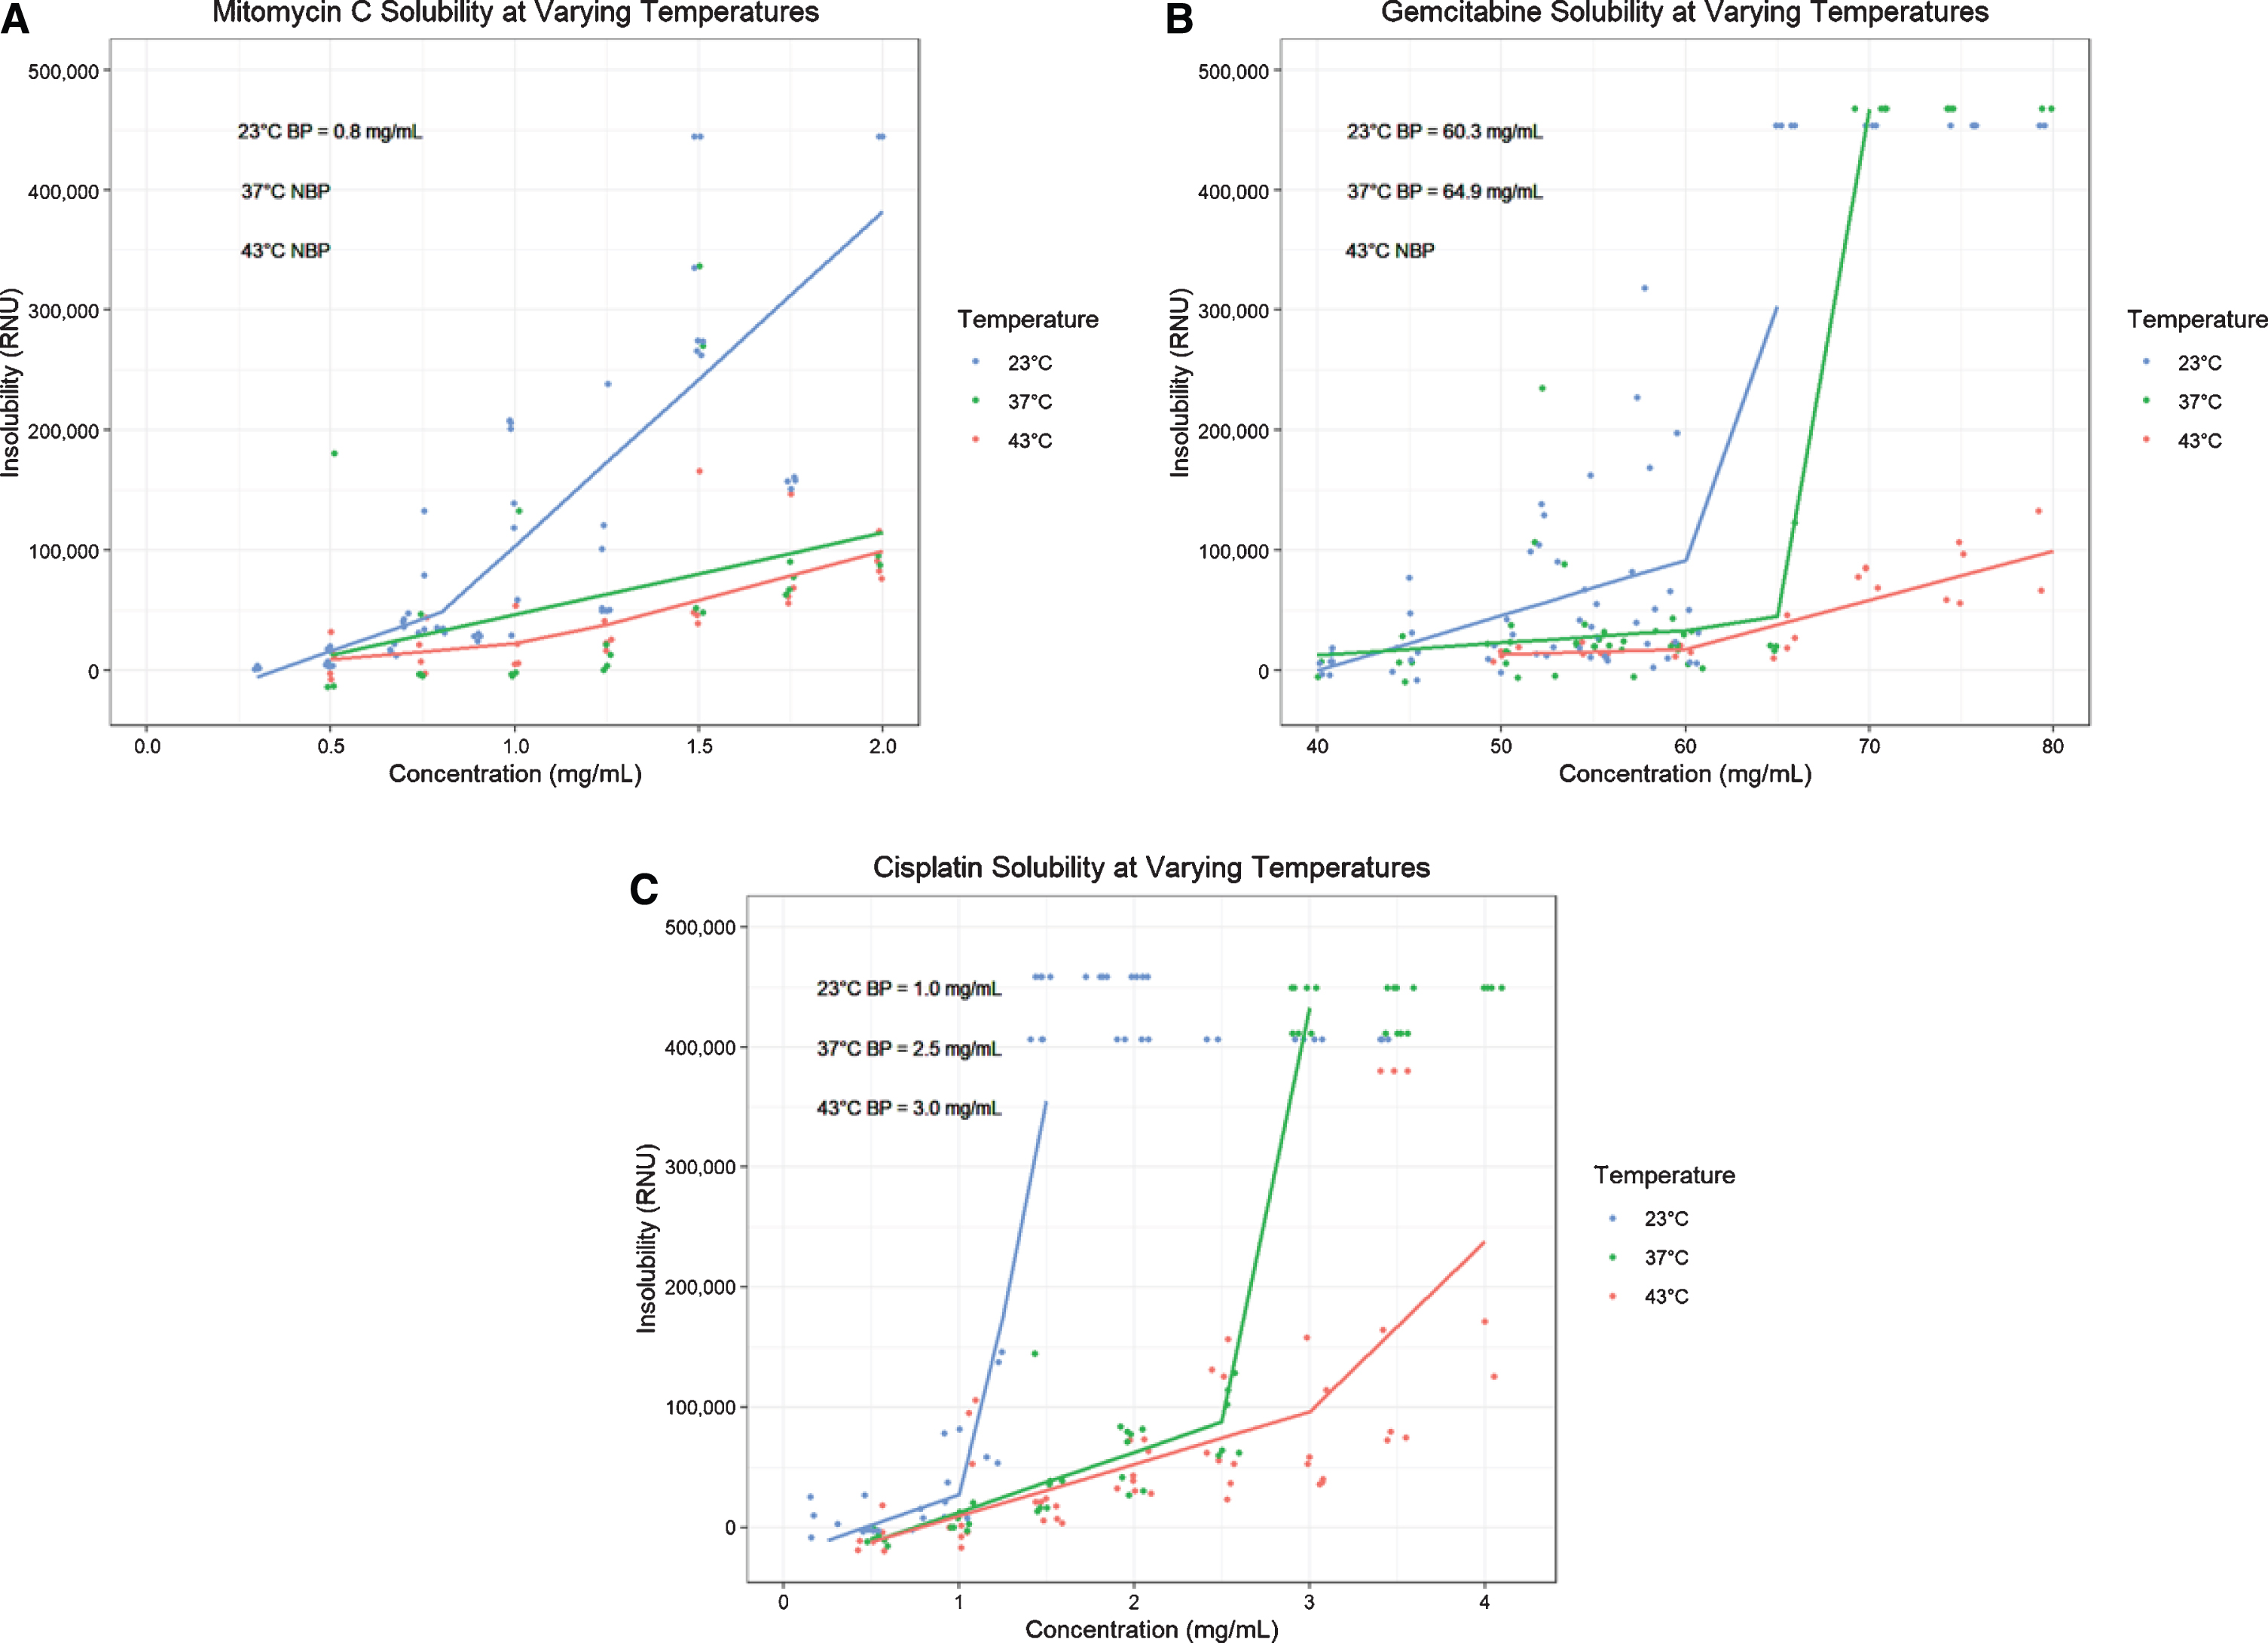 Solubility plots and segmental regressions at room temperature (23°C, blue), body temperature (37°C, green) and hyperthermic temperature (43°C, red) for Mitomycin C (A), Gemcitabine (B), and Cisplatin (C). Each shows a scatter plot of nephelometric data (RNUs) versus concentration (mg/mL) and the subsequent segmental regression with inflection point corresponding to the preparation’s kinetic solubility point. Abbreviations: BP = Breakpoint, NBP = No breakpoint calculated (no clear inflection point of solubility plot).